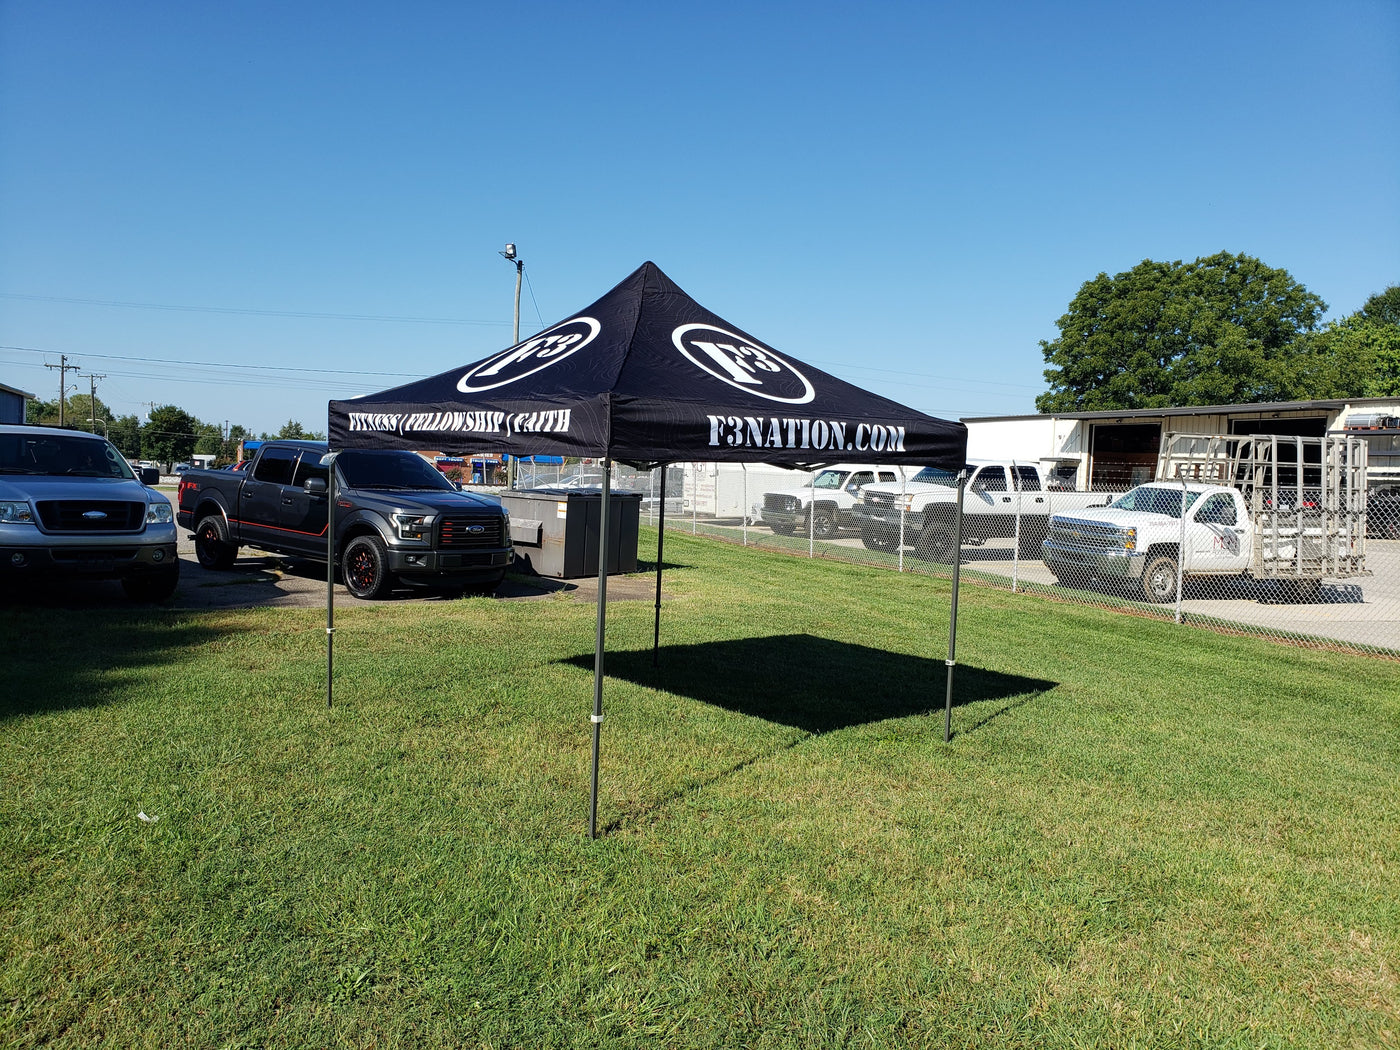 F3 Nation Canopy Tent 10x10